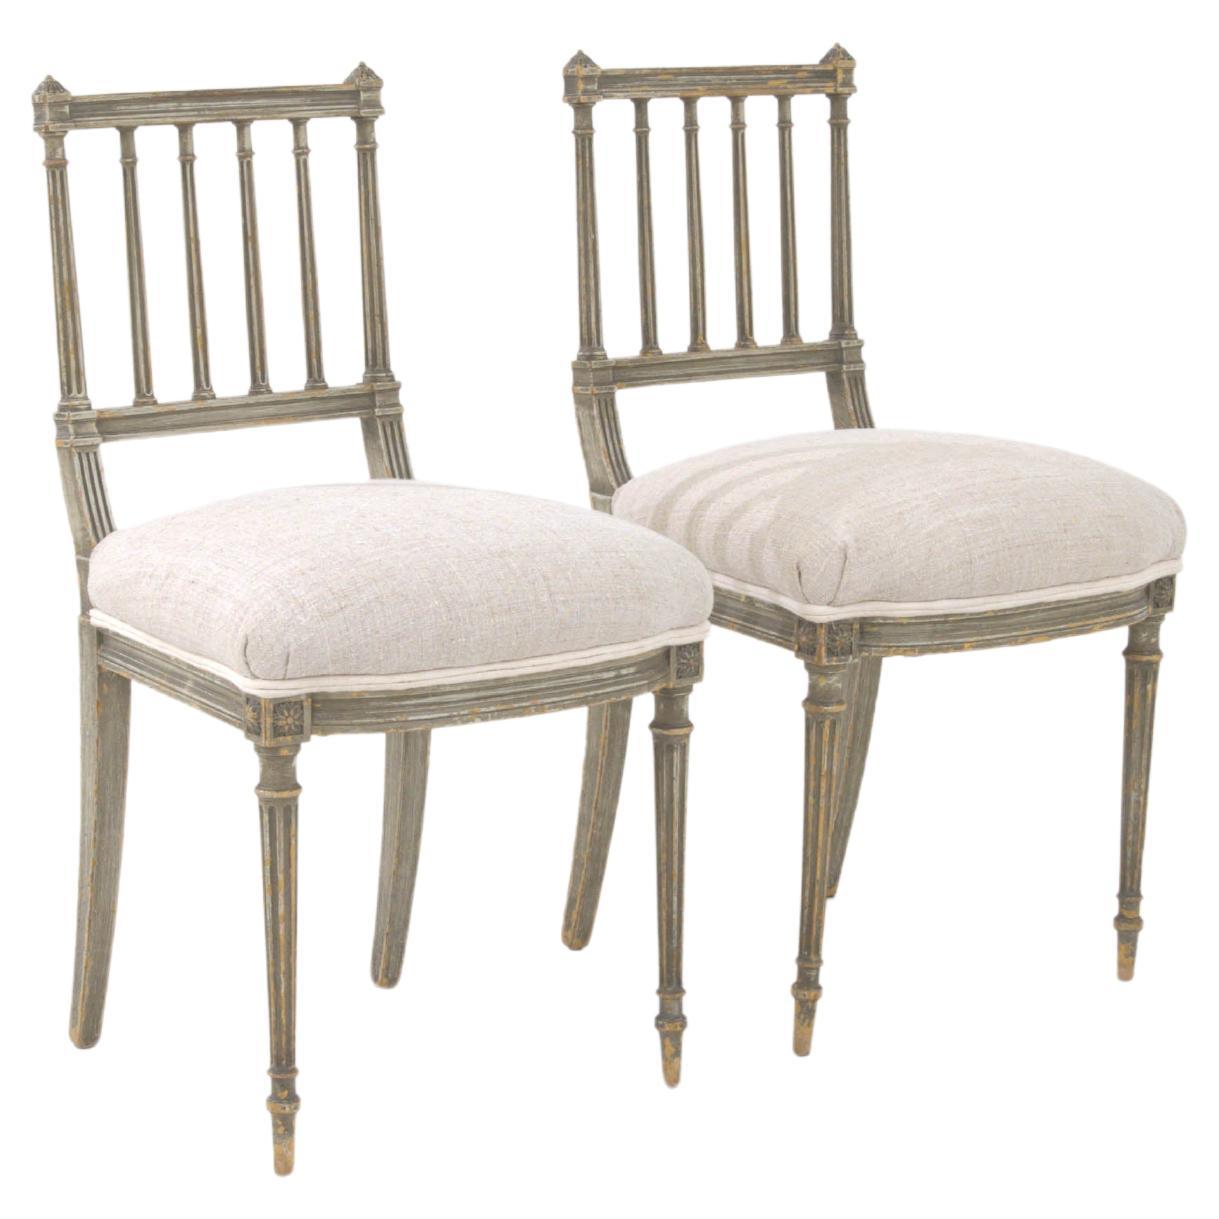 1880s French Pair Of Dining Chairs With Upholstered Seats